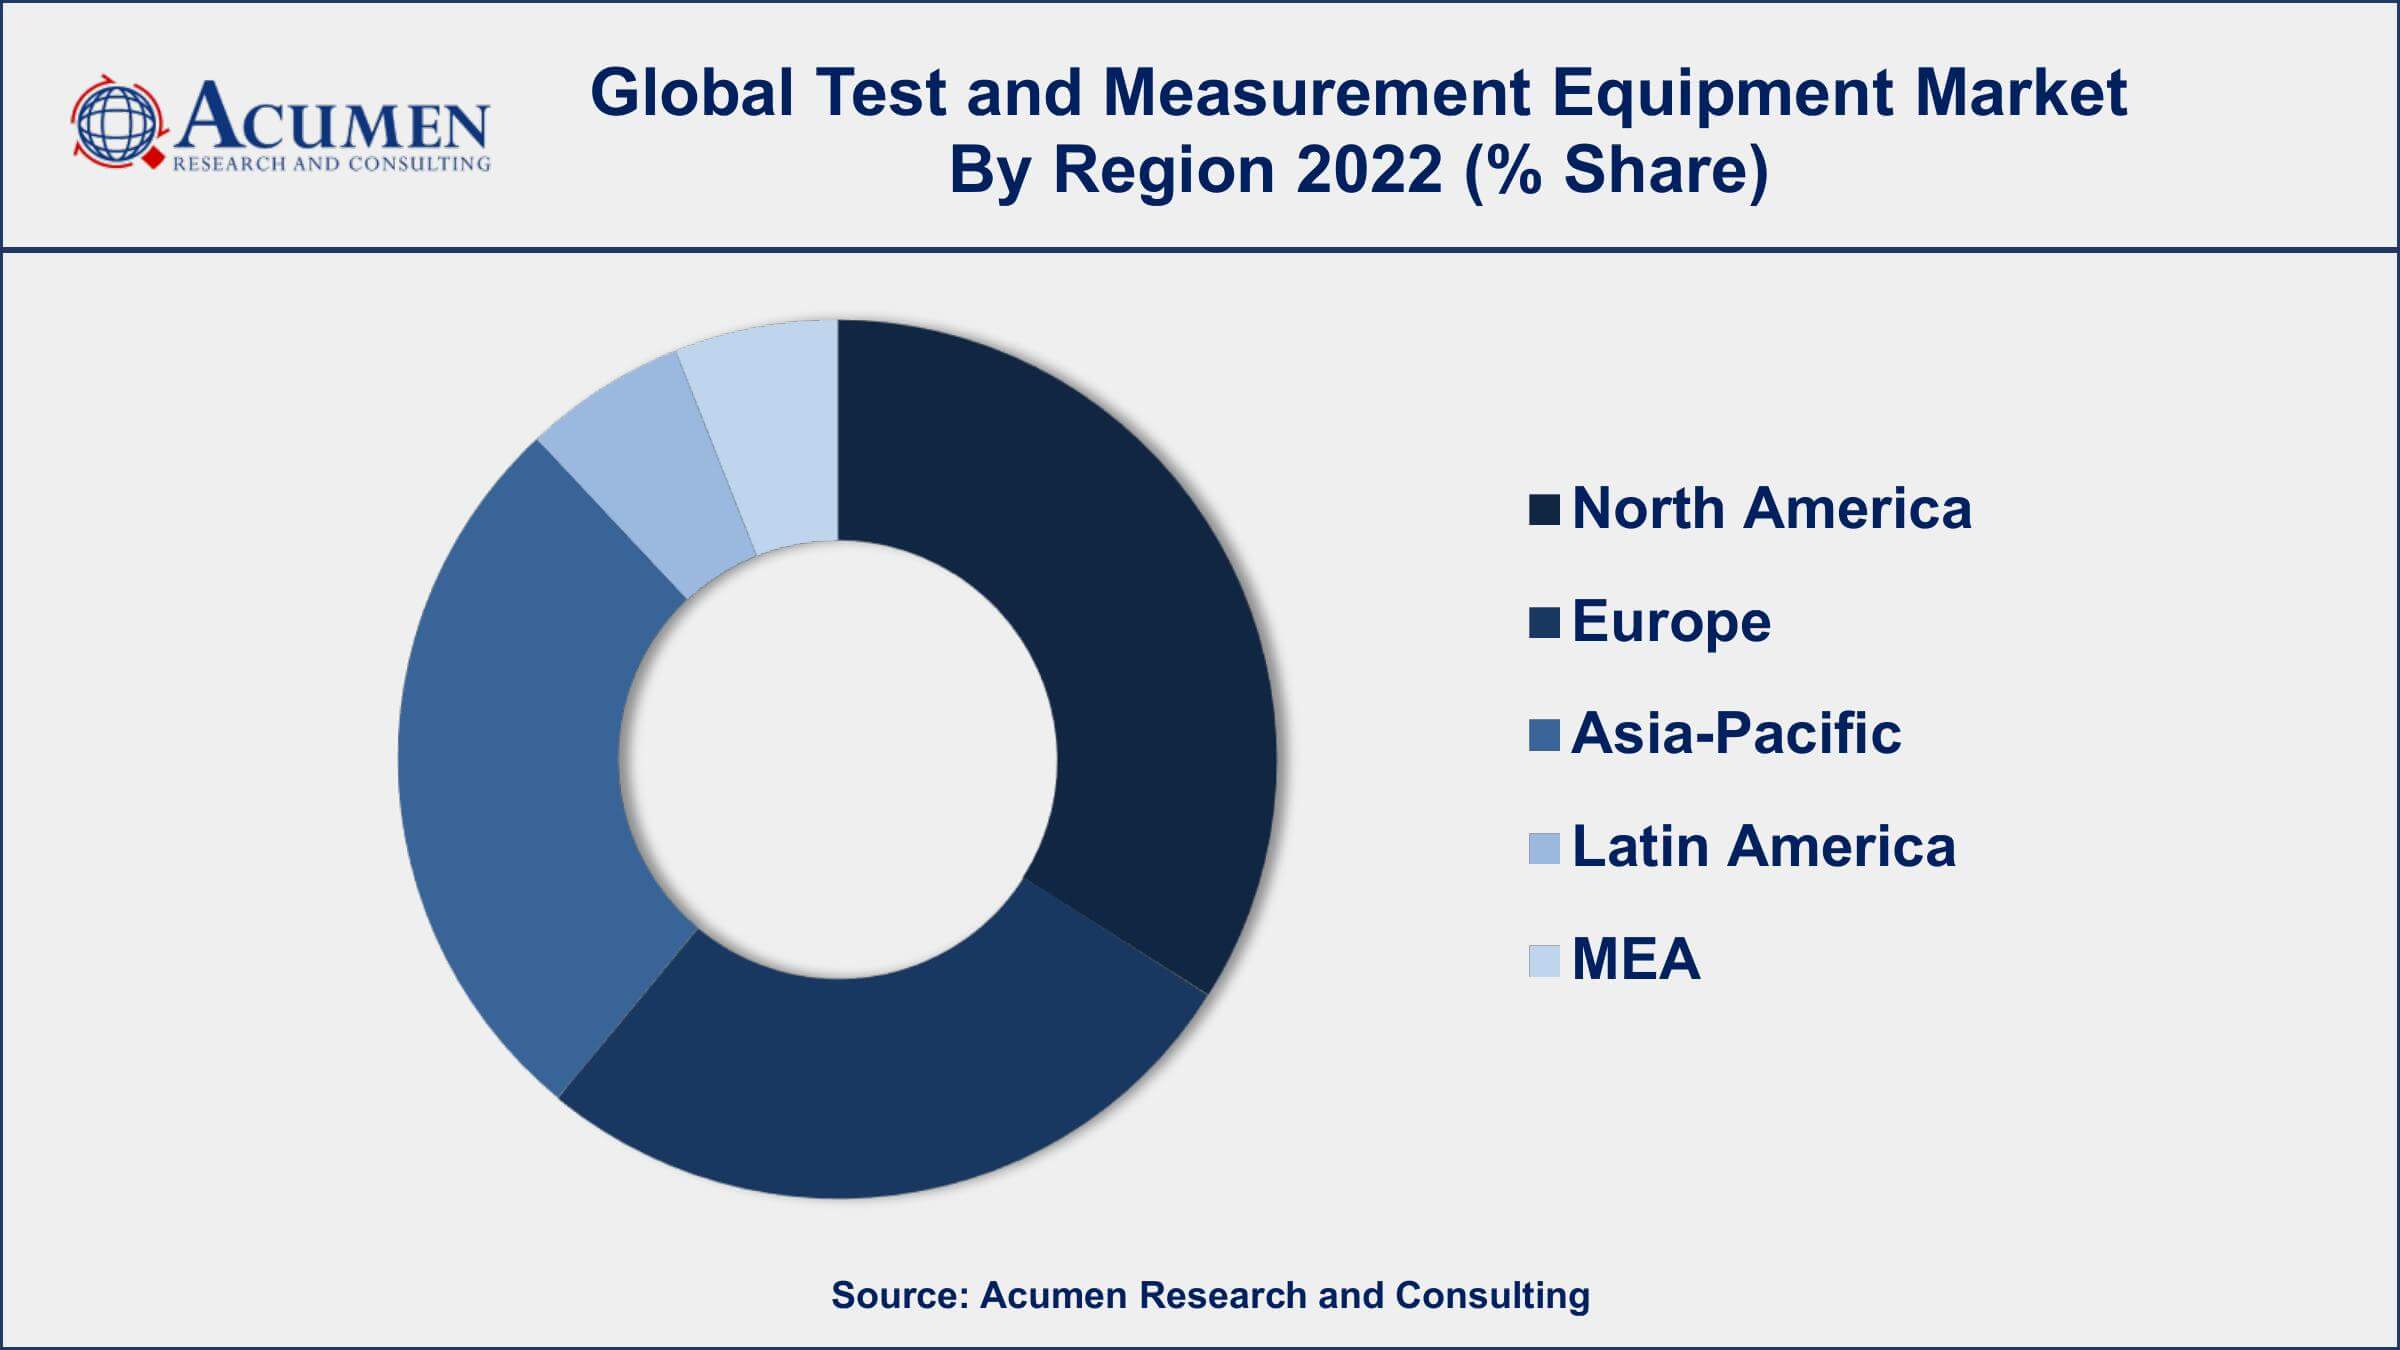 Test and Measurement Equipment Market Drivers